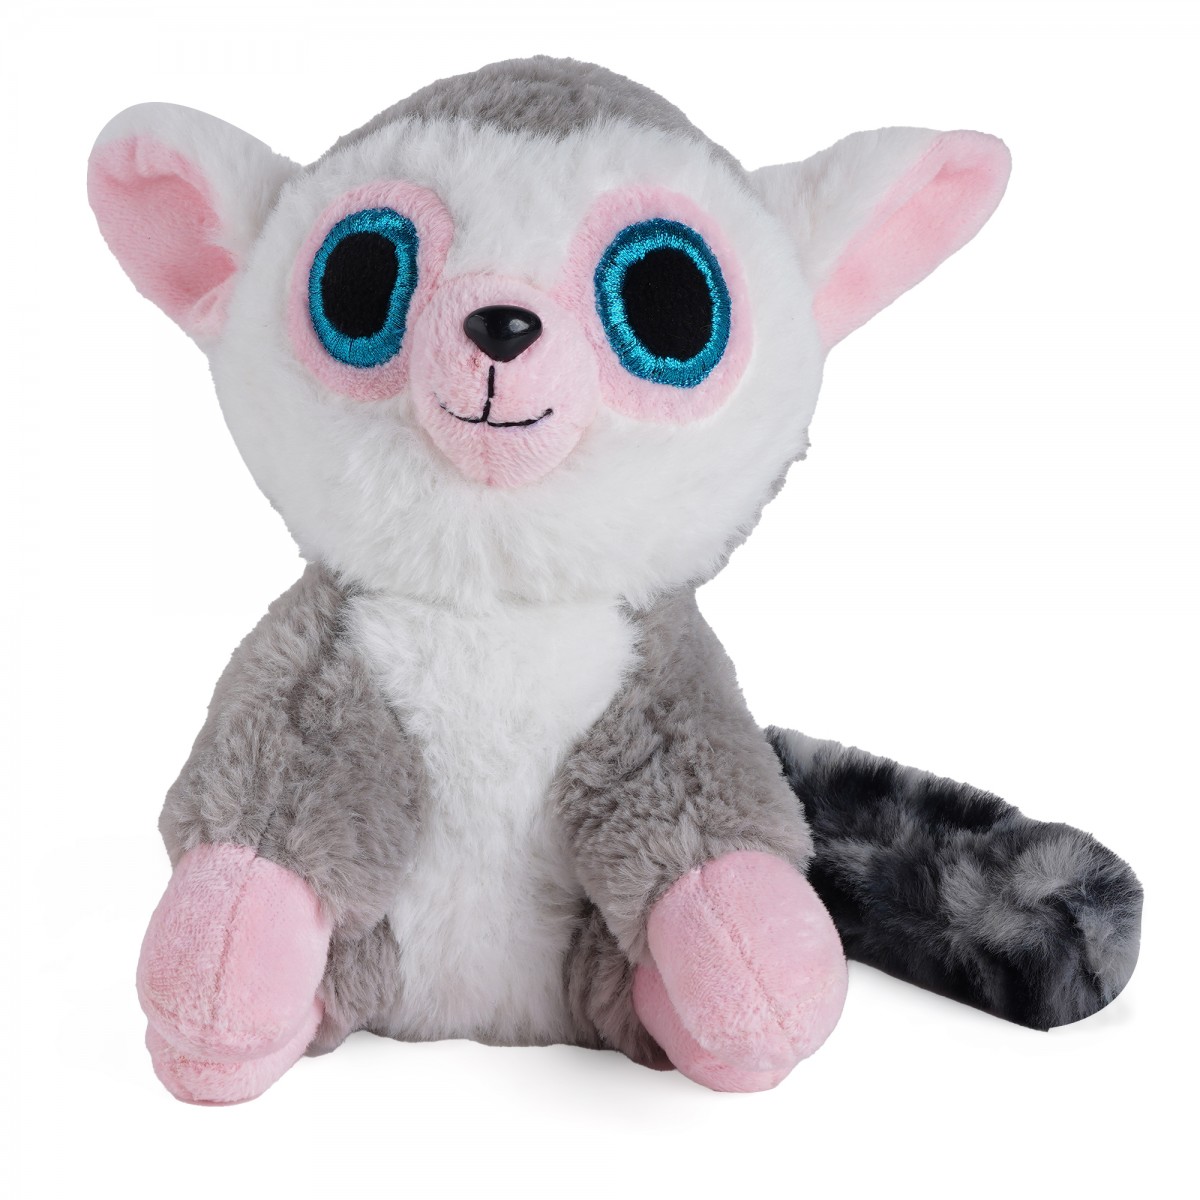 Huggable Cuddly Stuffed Toy By Fuzzbuzz, Soft Toys for Kids, Cute